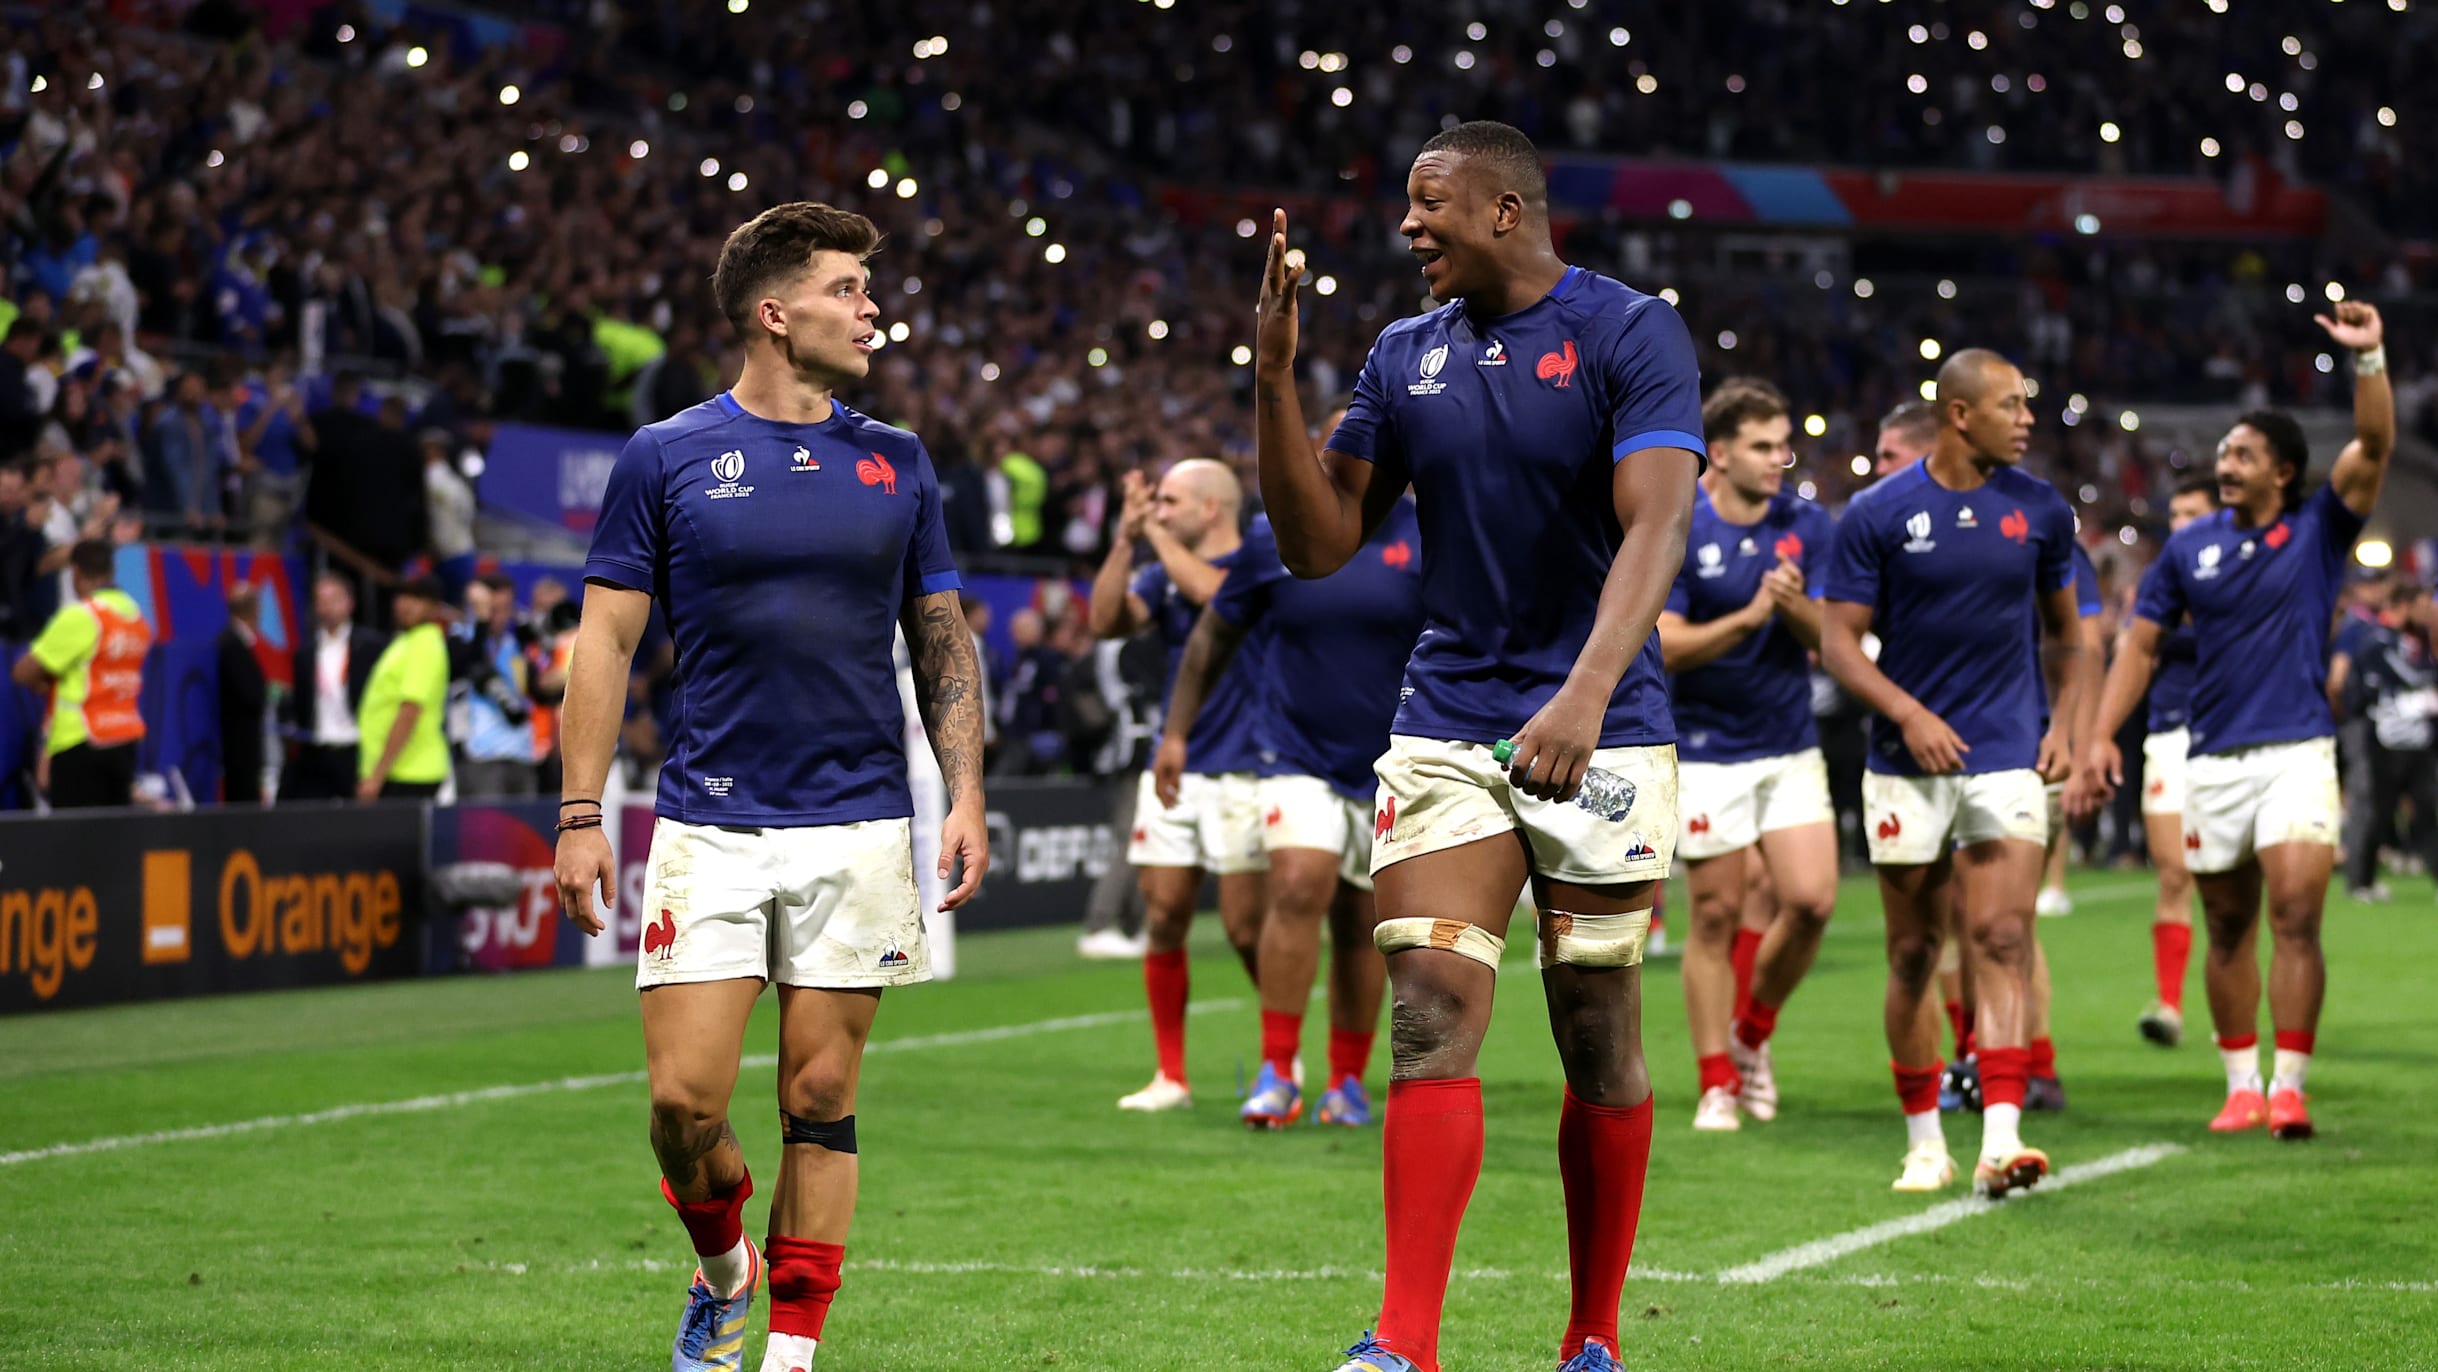 Four players to watch during The Rugby Championship 2022